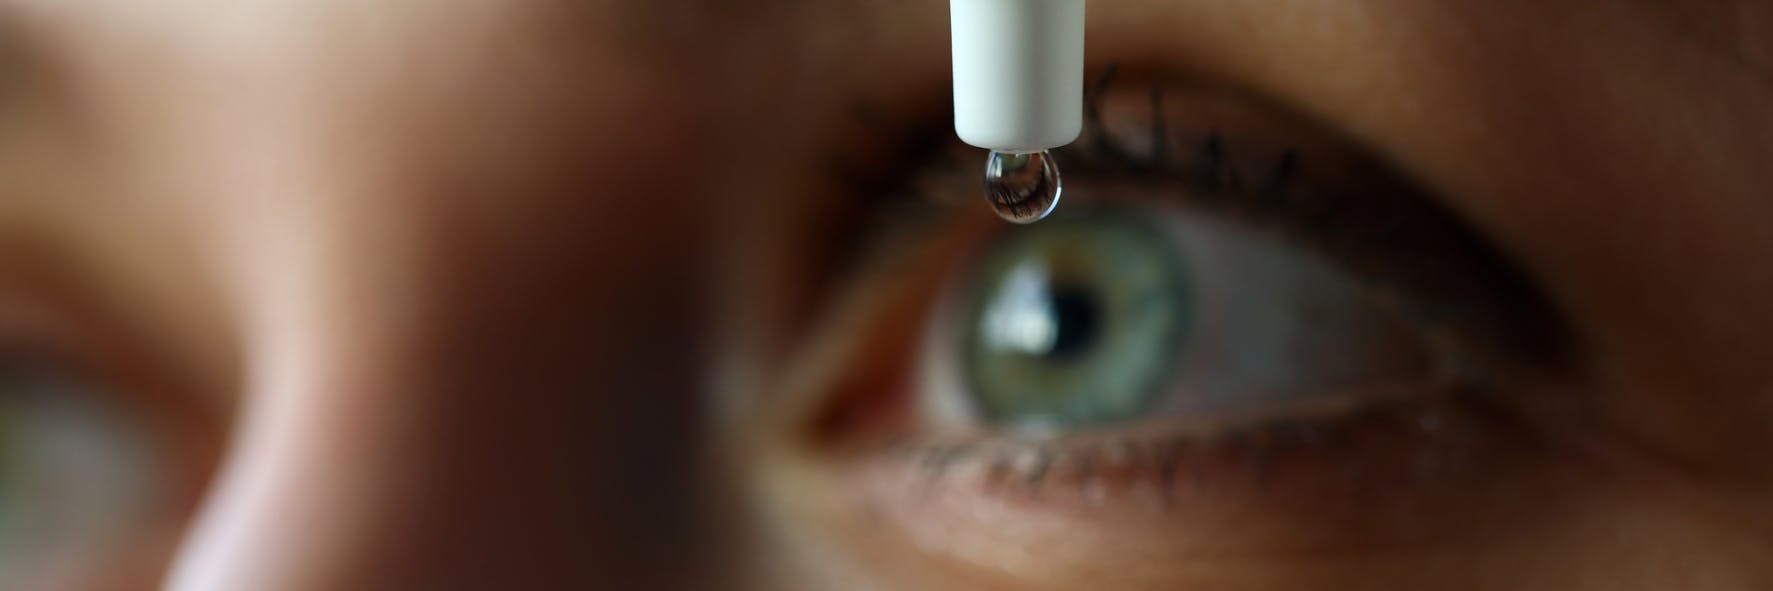 there is a close up of a woman's eye with a drop of liquid in it